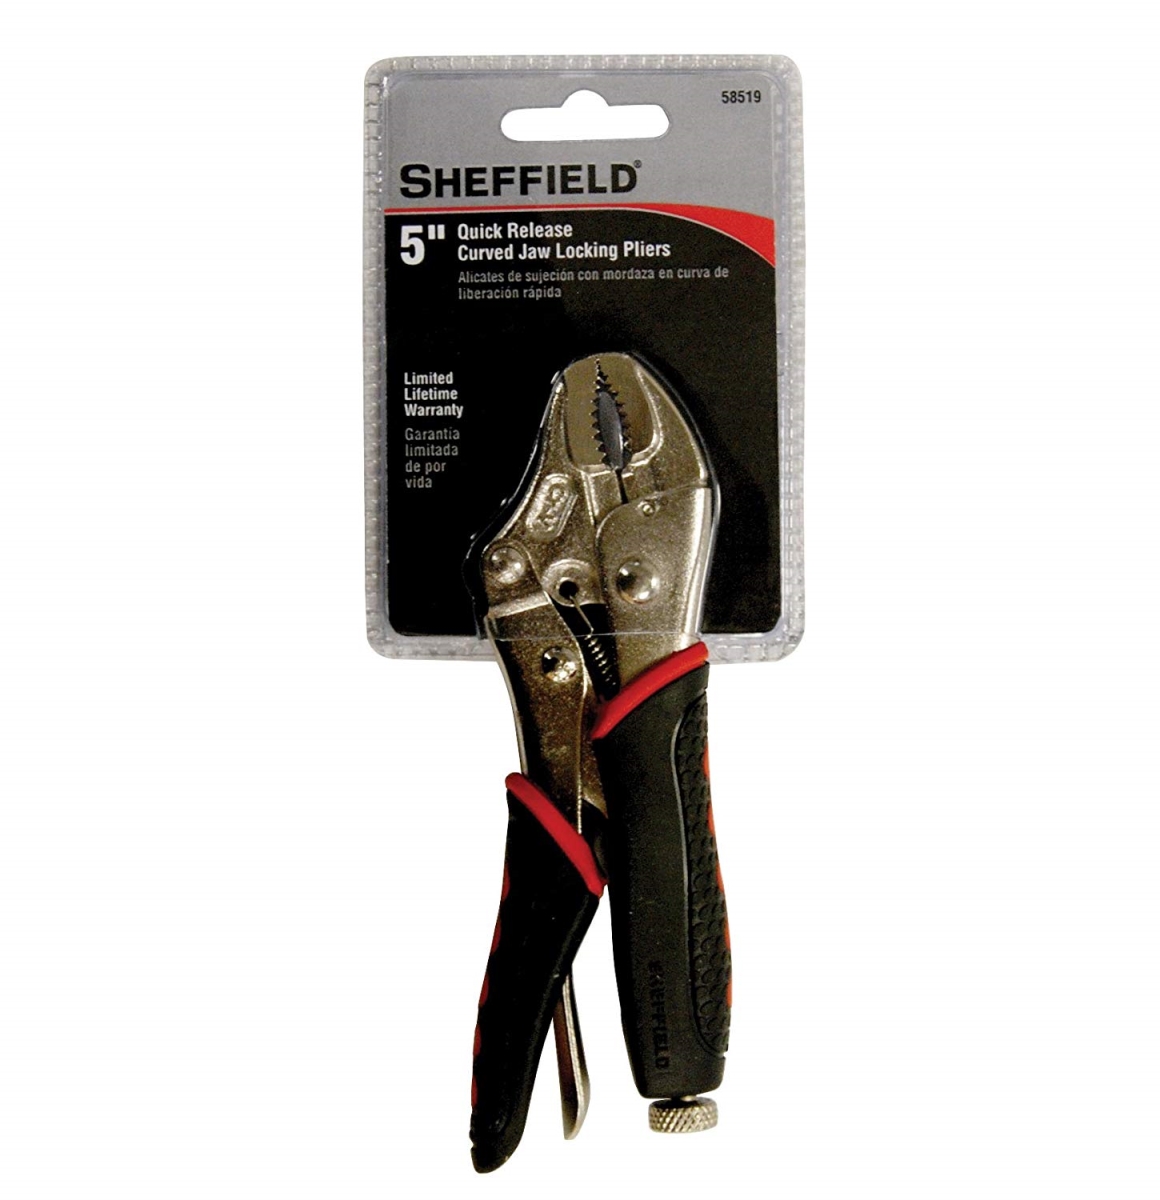 58519 5 In. Quick Release Curved Jaw Locking Pliers, Black & Red